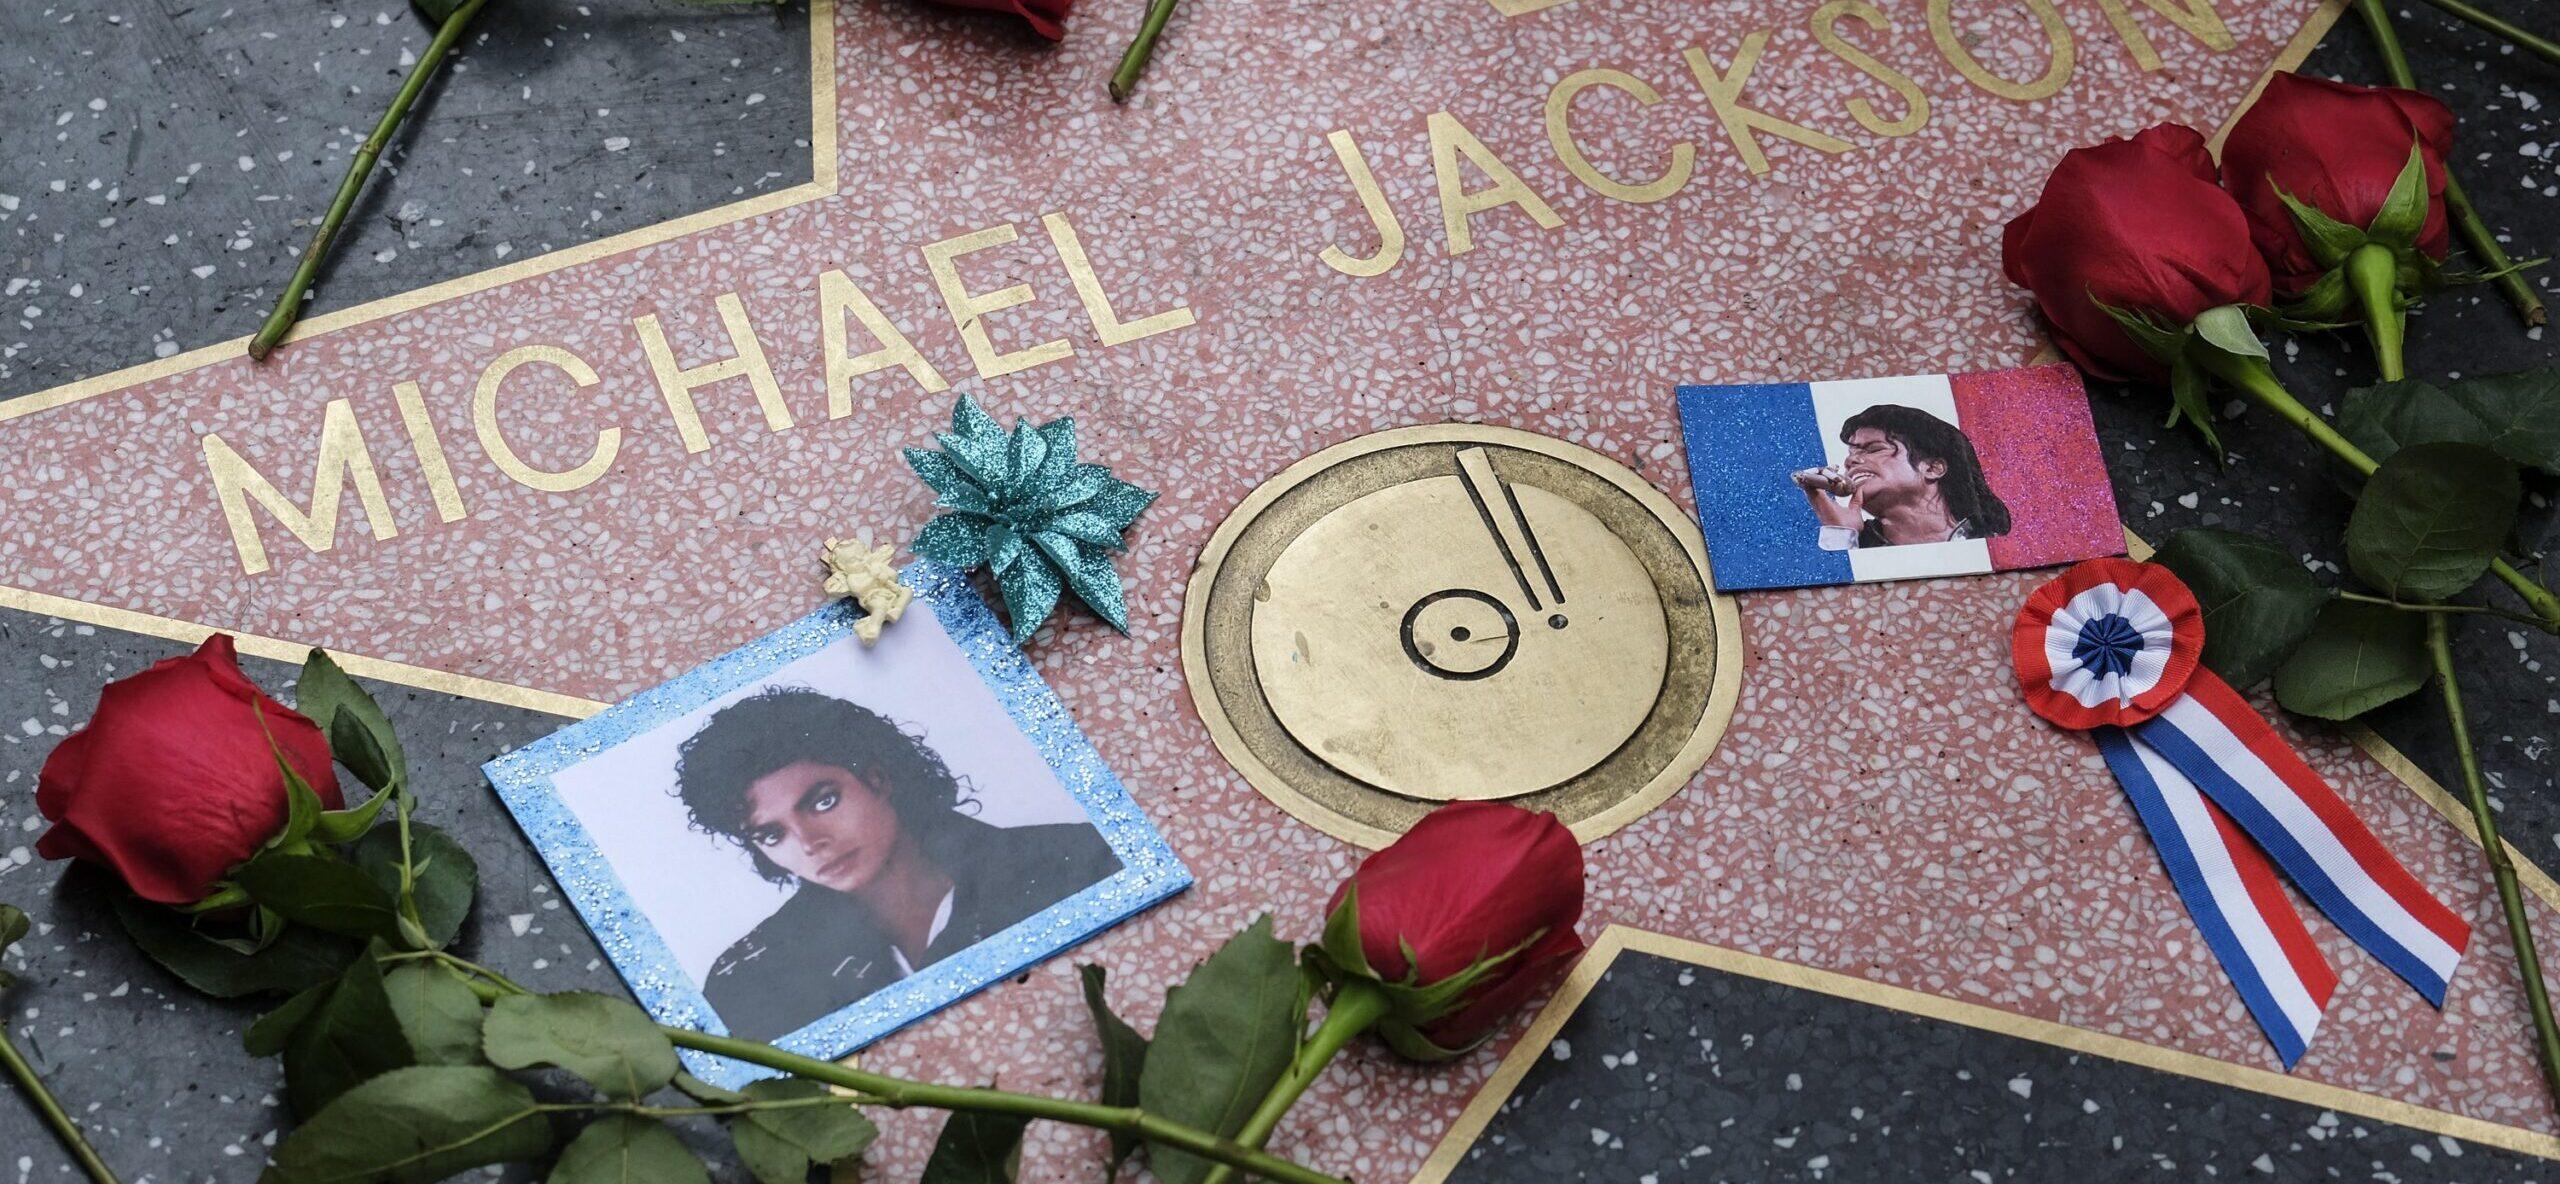 Michael Jackson’s Estate Pays $2,500 To Restore His Star On Hollywood Walk Of Fame